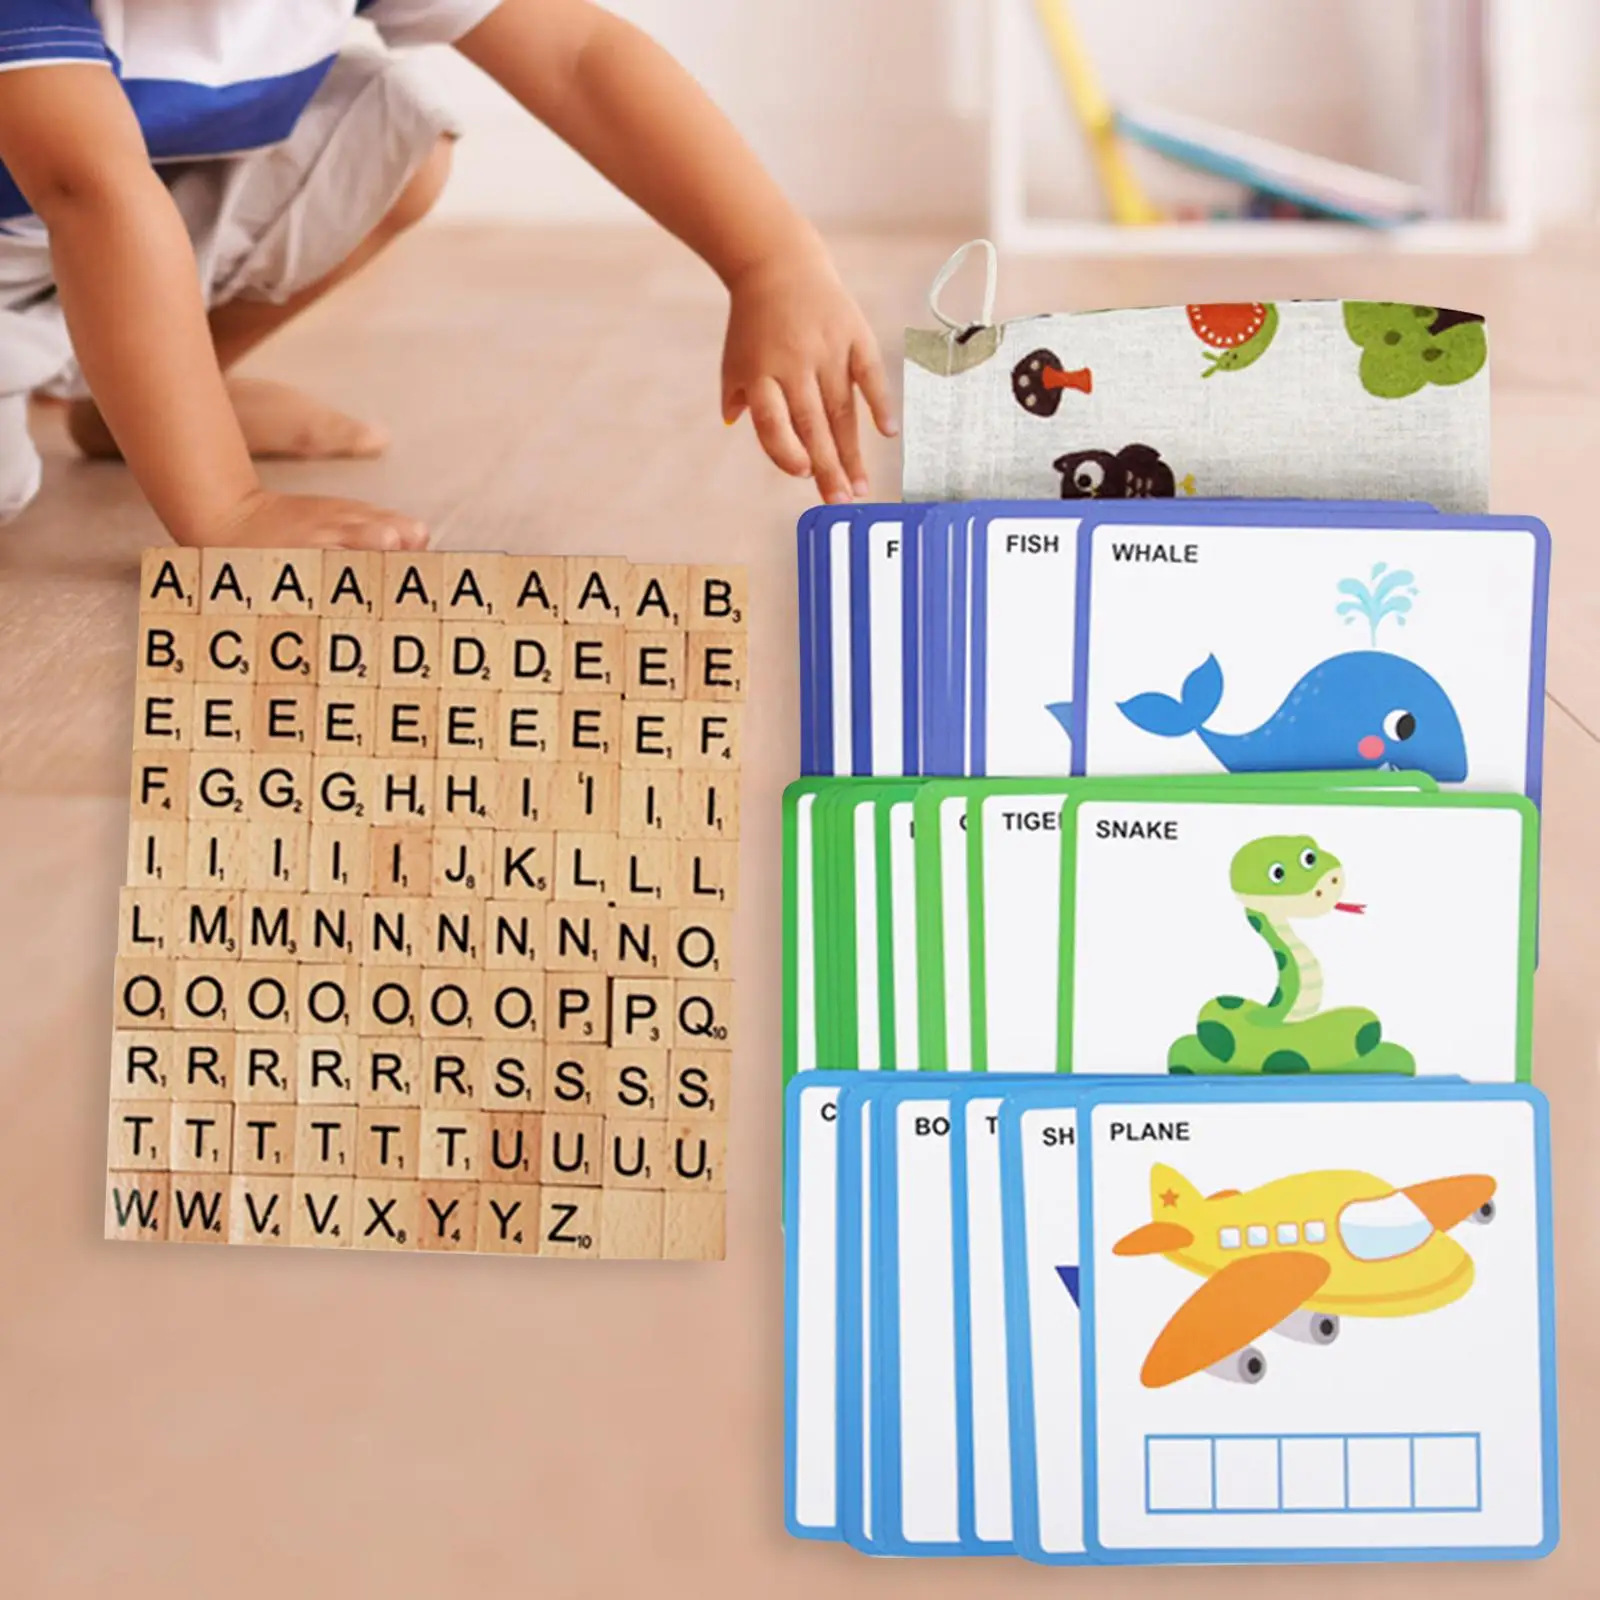 

Spelling Games Flashcards with 100 Alphabet Blocks Learning Activities for Preschool Ages 3 4 5 Years Old Kindergarten Kids